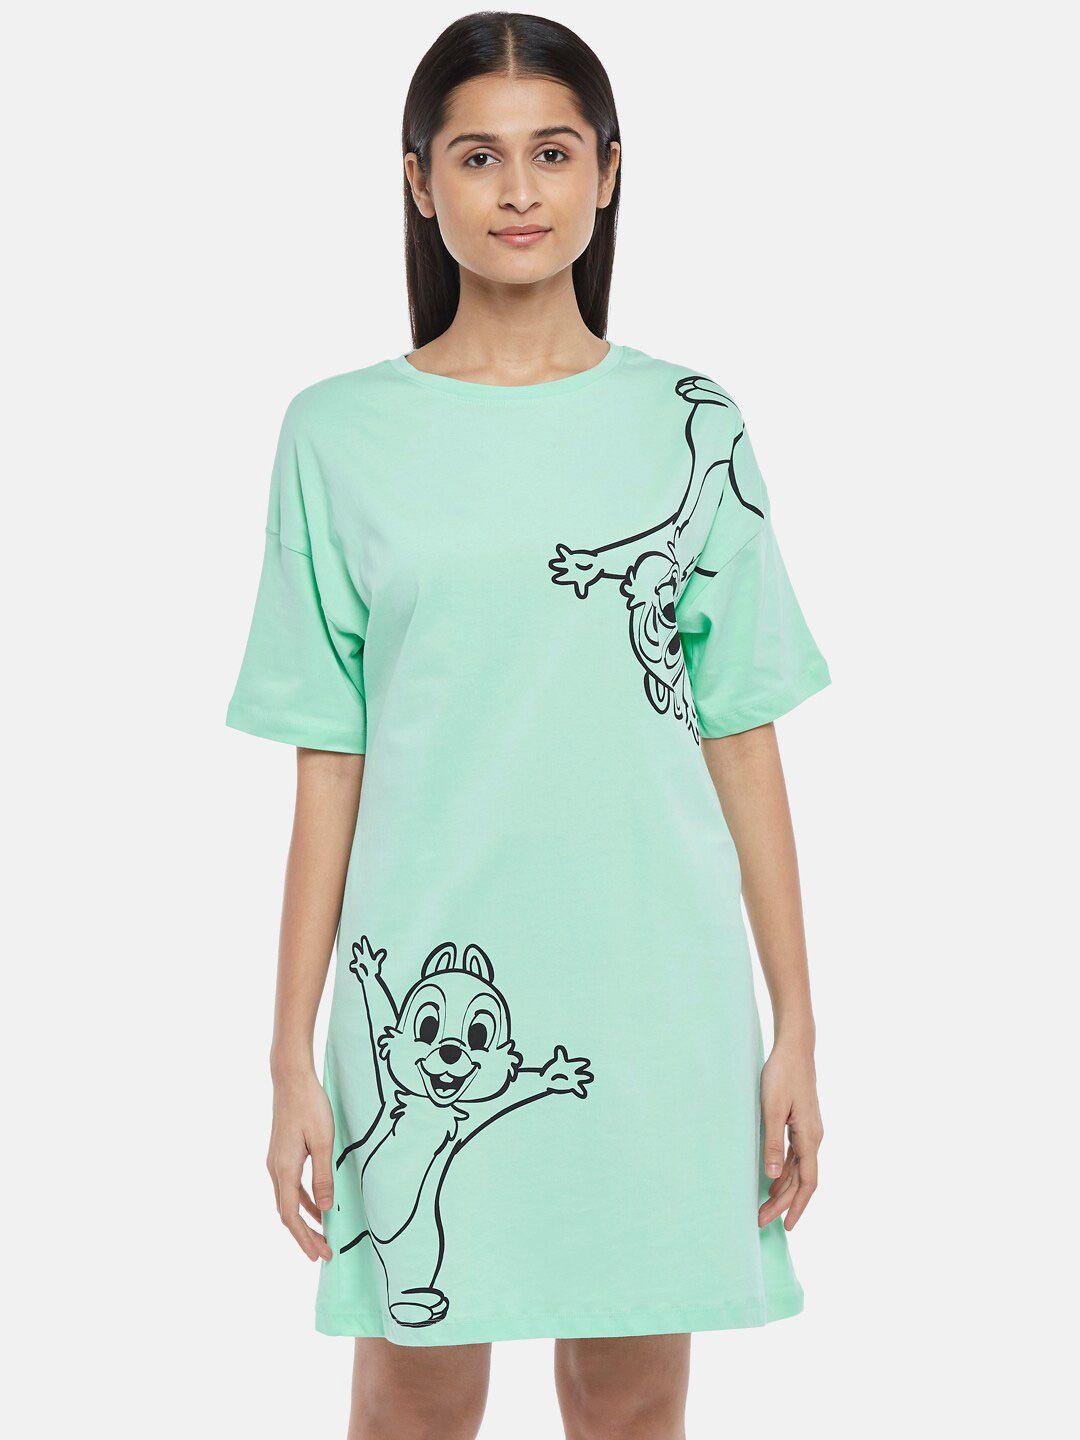 dreamz by pantaloons graphic printed pure cotton t-shirt nightdress